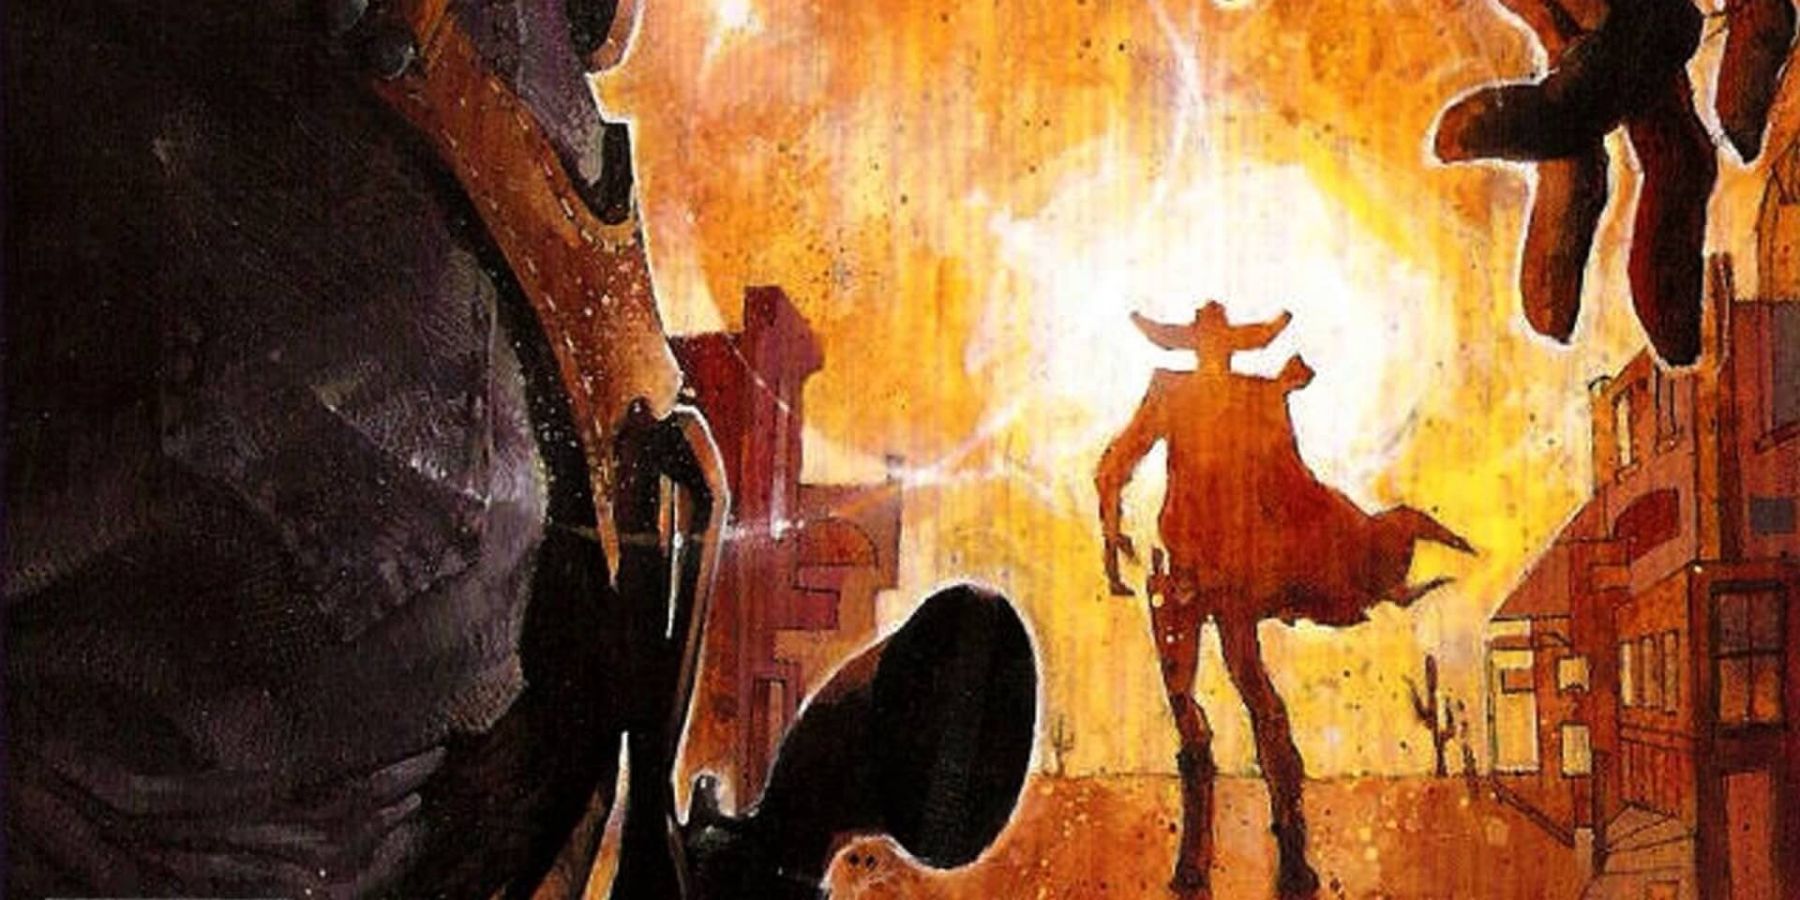 US Marshall and an outlaw having a duel in key art for Outlaws 1997